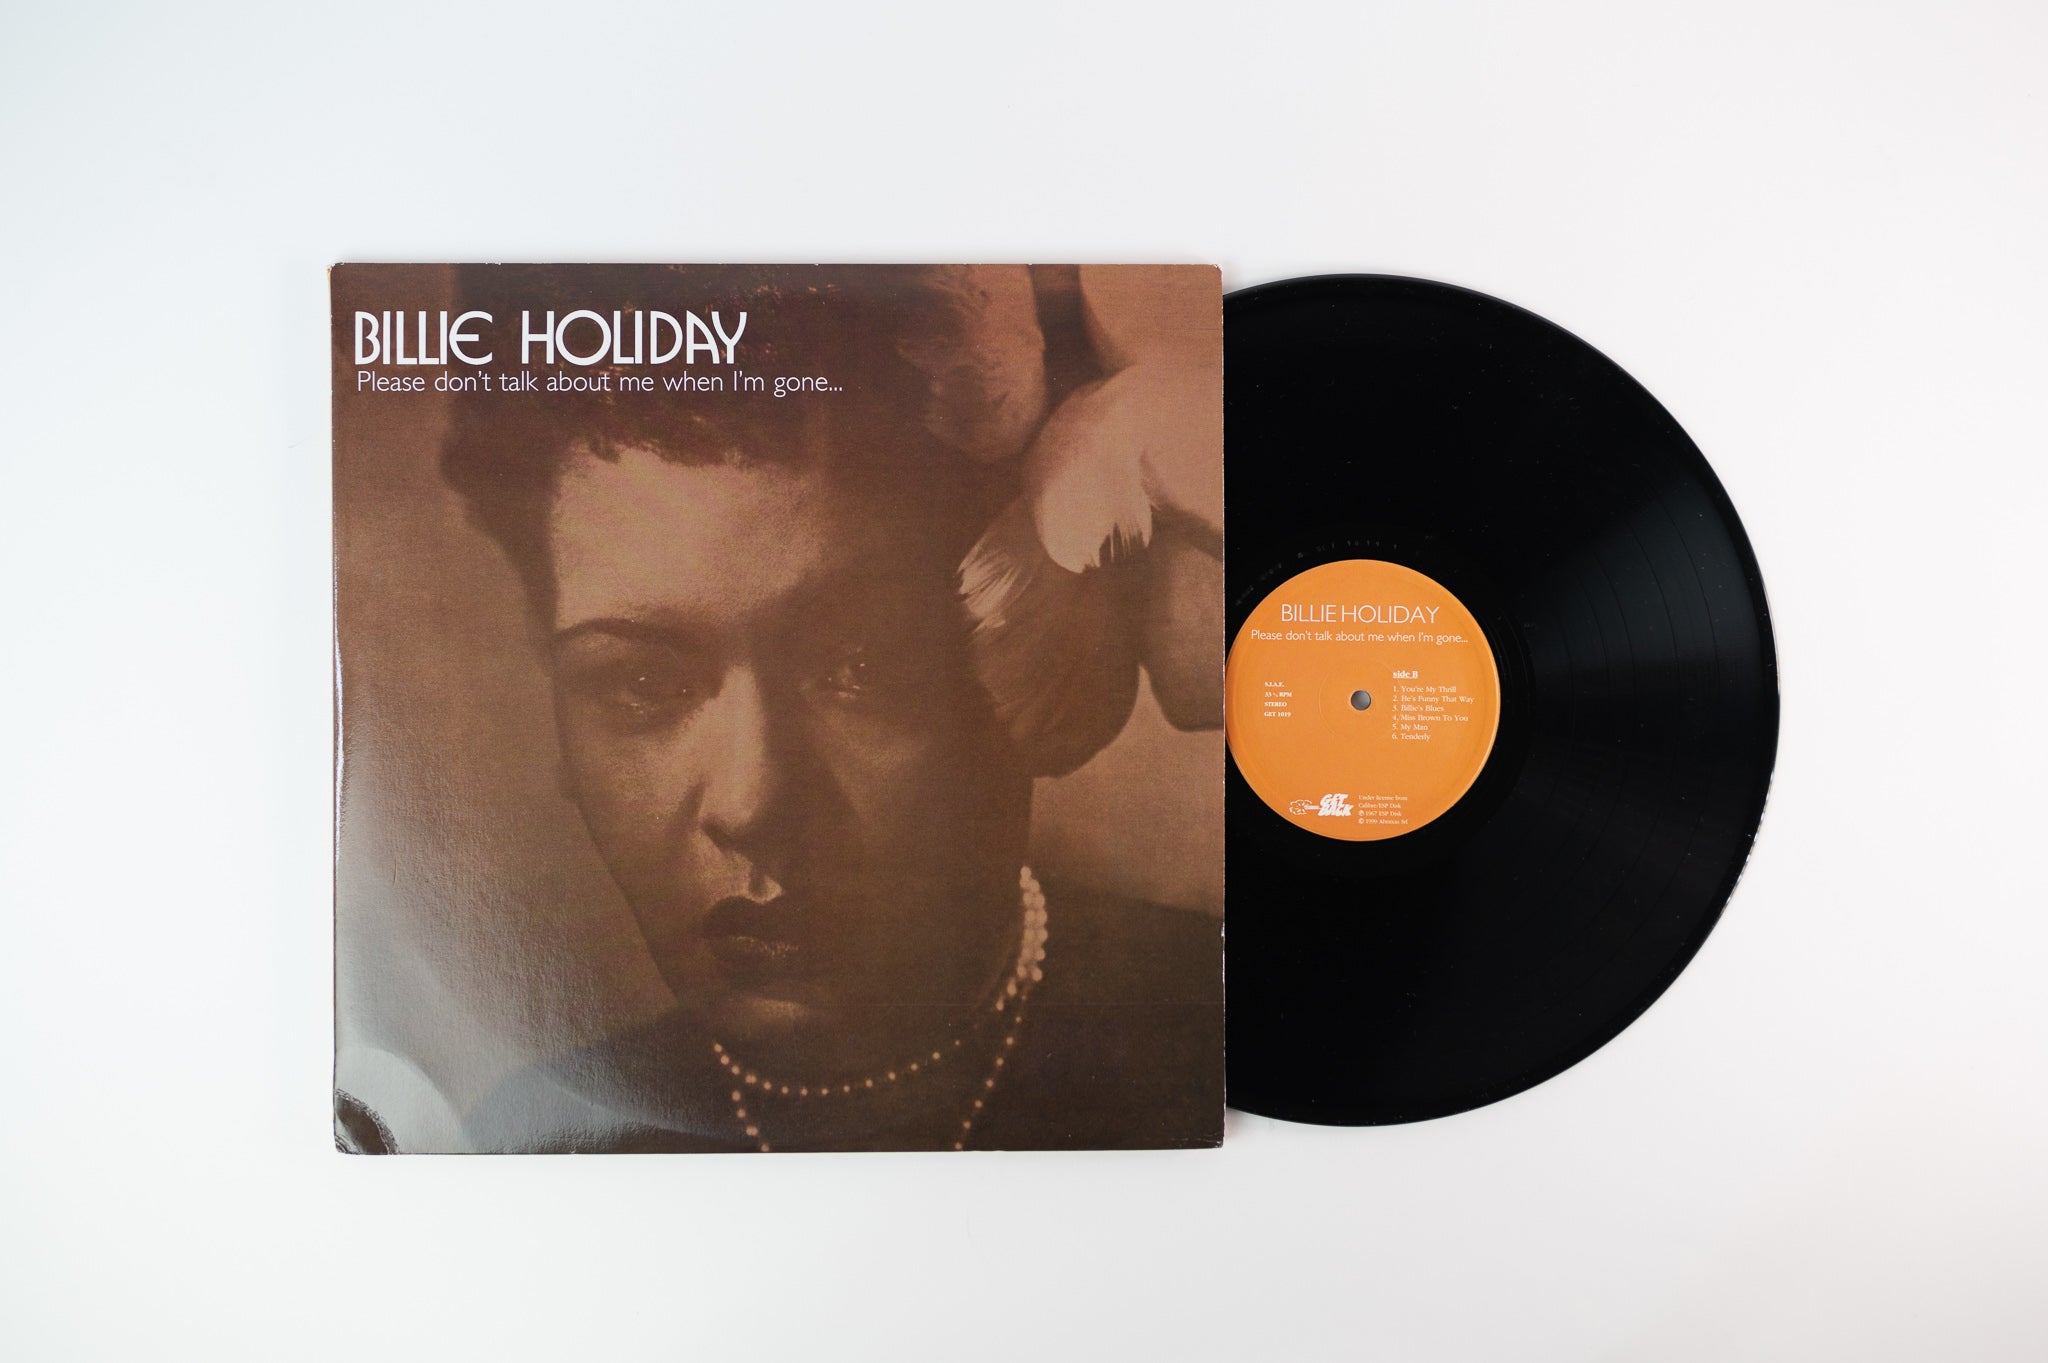 Billie Holiday - Please Don't Talk About Me When I'm Gone... on Get Back 180 Gram Italian Press